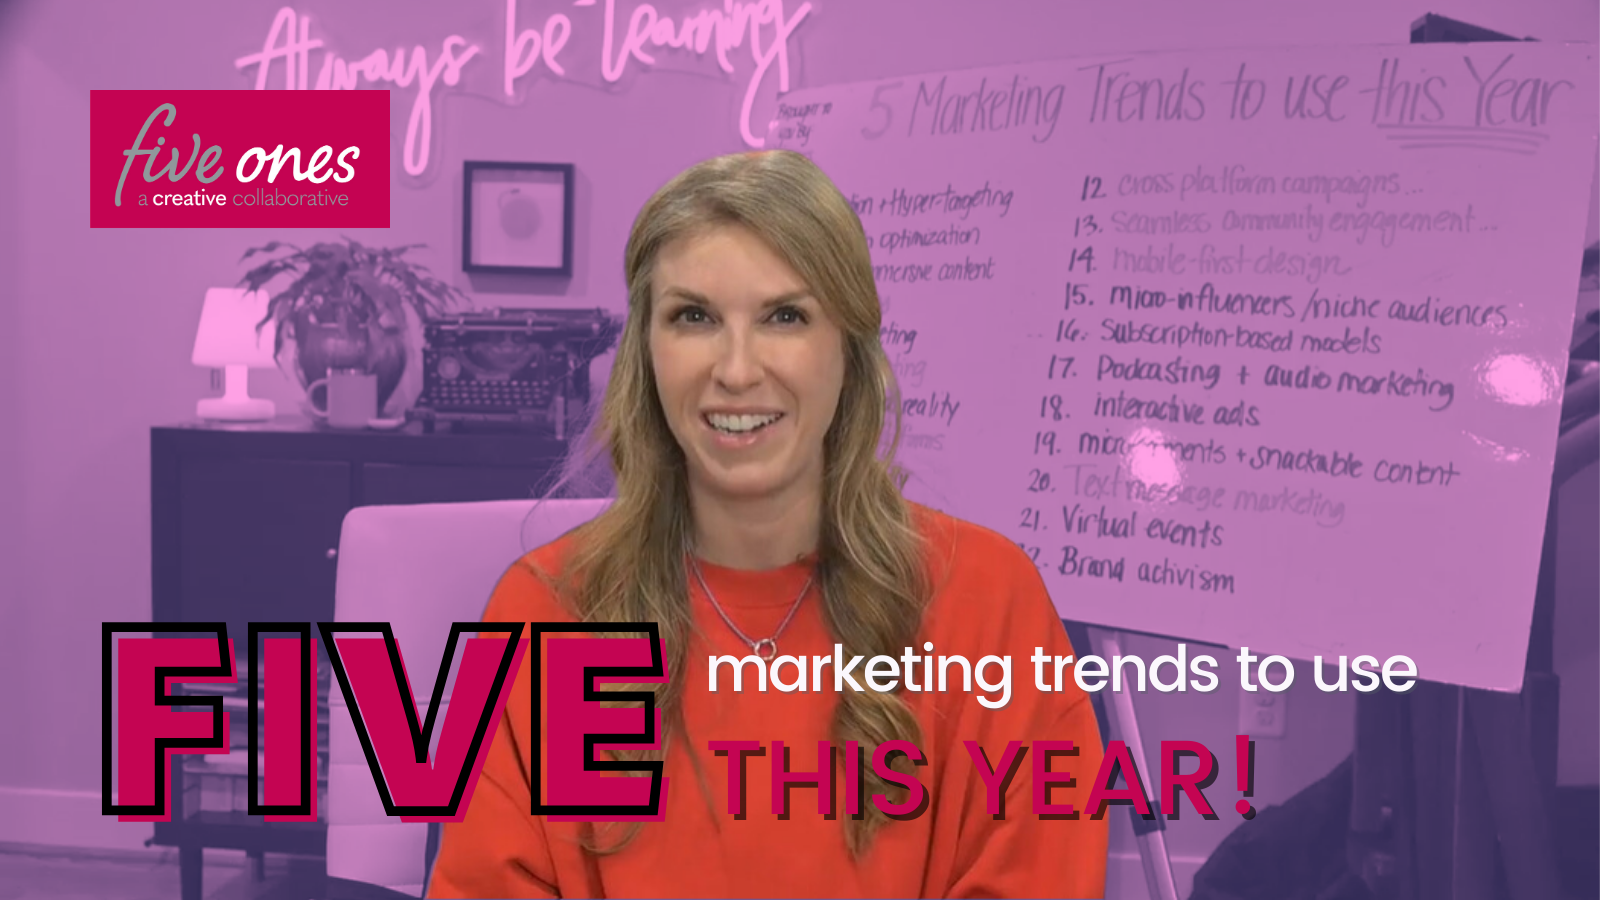 5 Marketing Trends to Use This Year